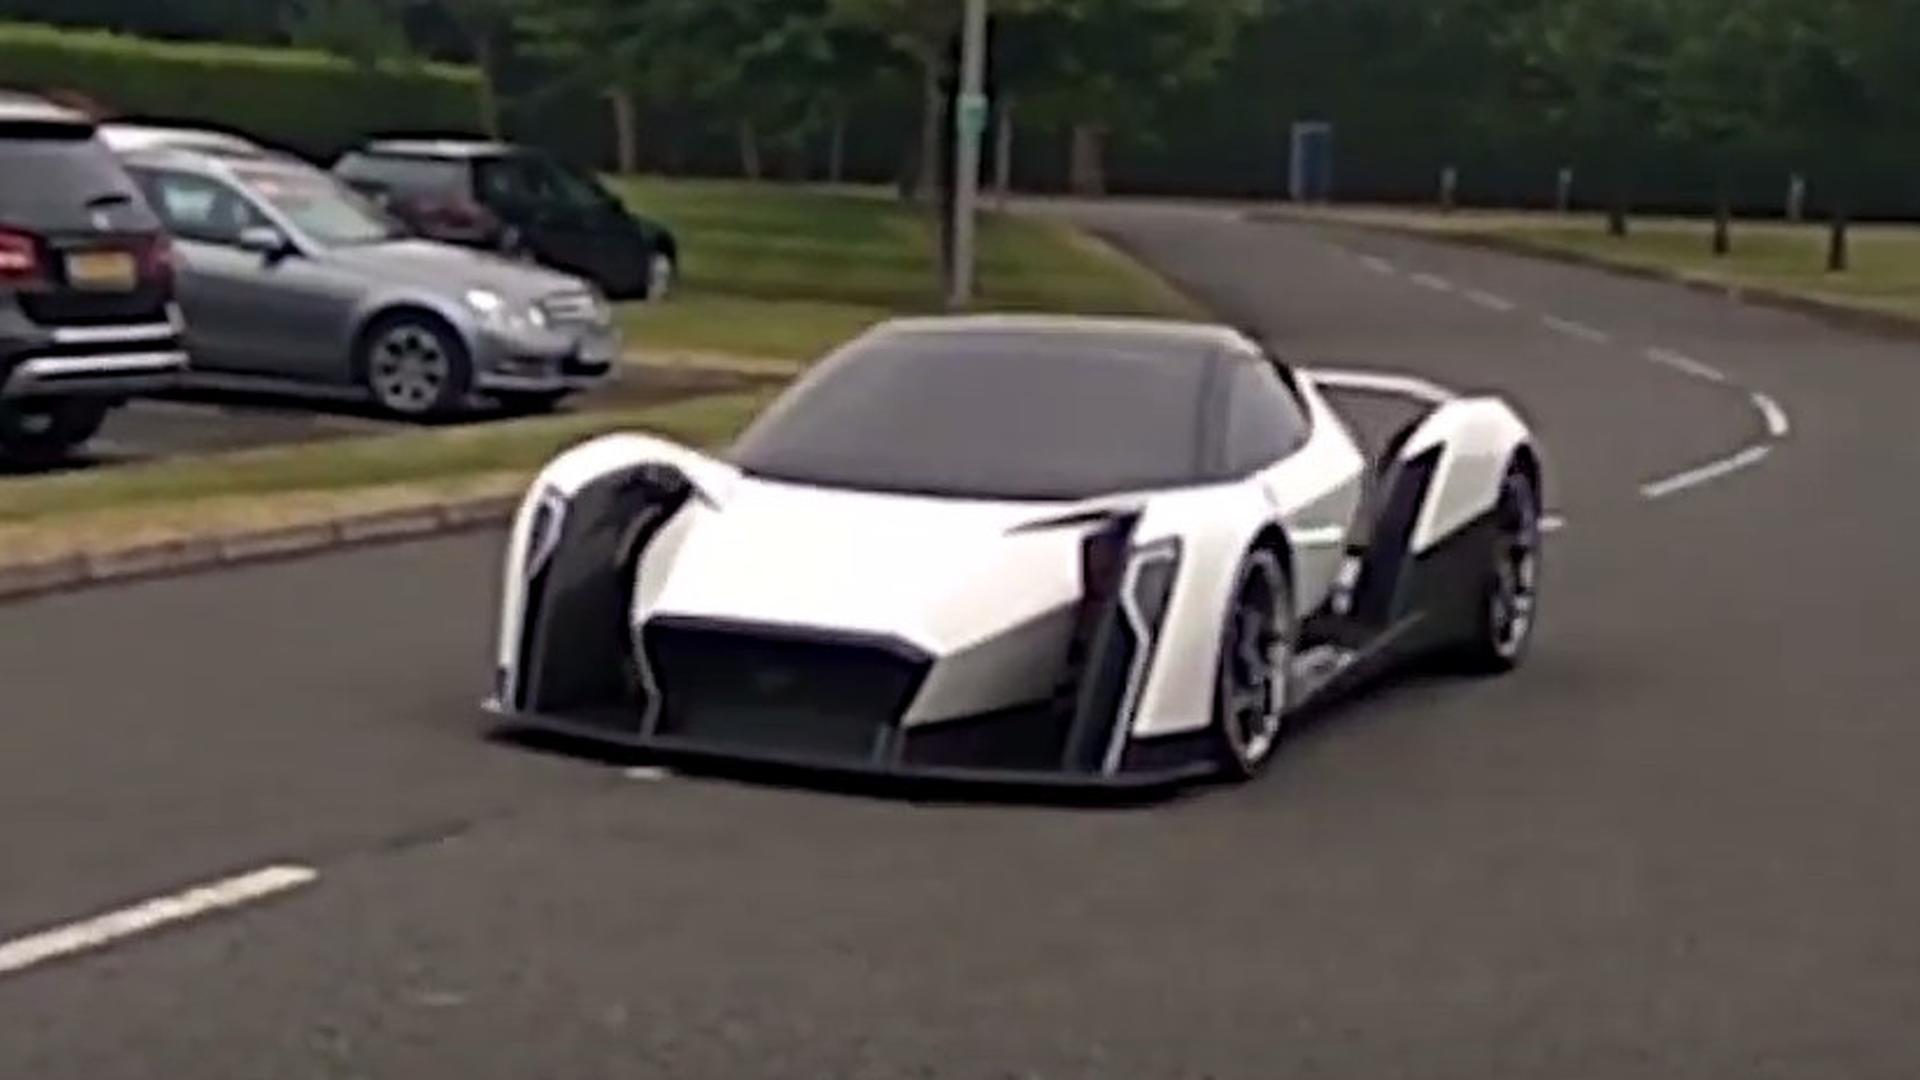 Vanda Dendrobium Electric Hypercar Spotted On The Move